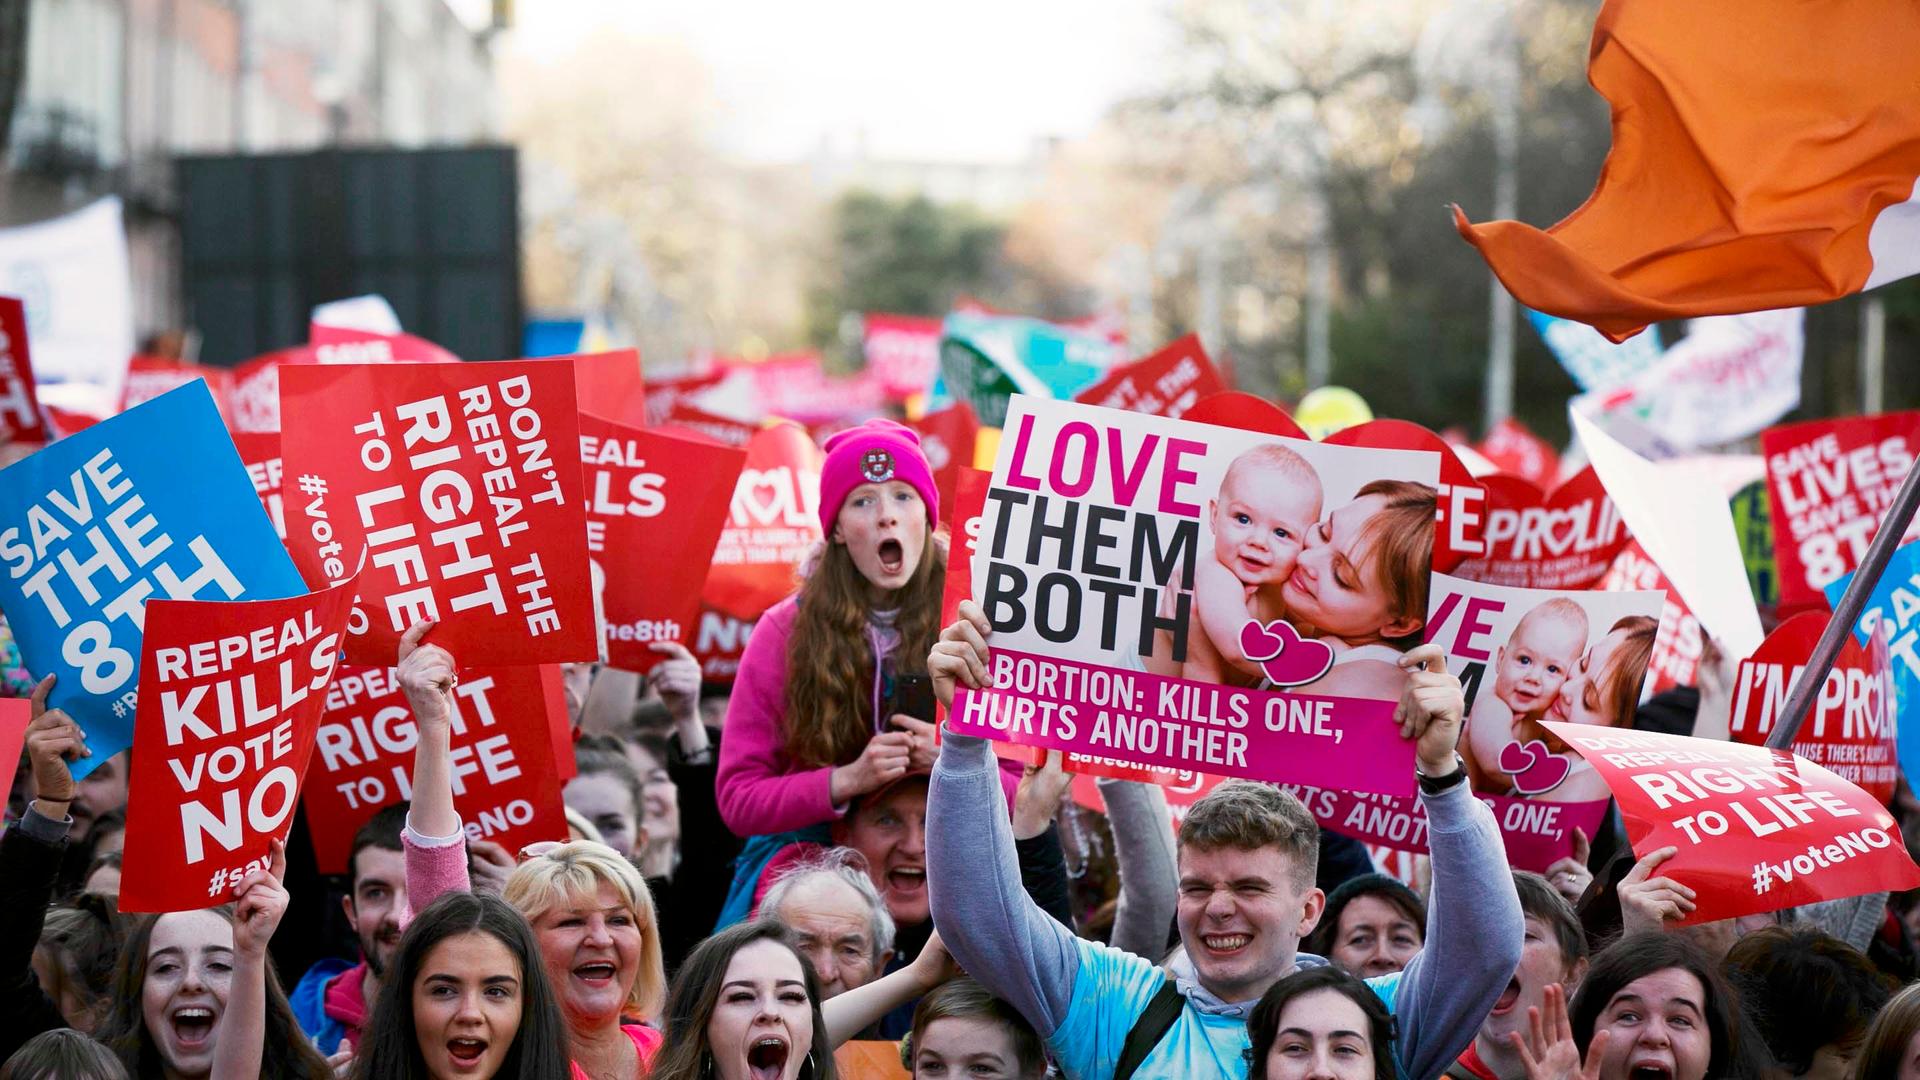 Demonstrators taking part in an anti-abortion rally in Dublin, Ireland on March 10, 2018. An estimated 100,000 people were there to "Save the 8th", the constitutional amendment that bans abortion.      